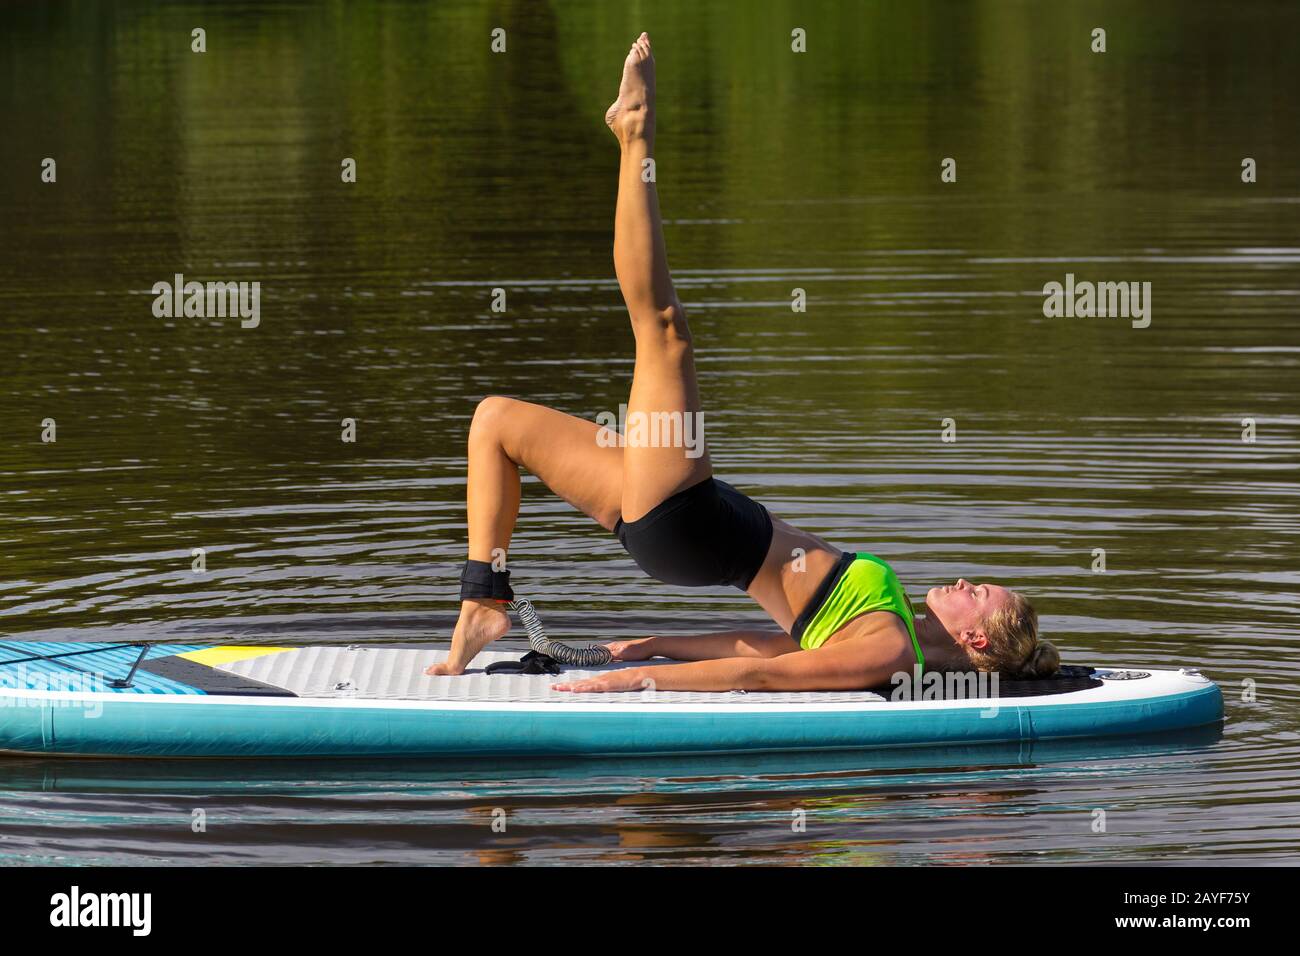 Woman in yoga pose leg up on SUP Stock Photo